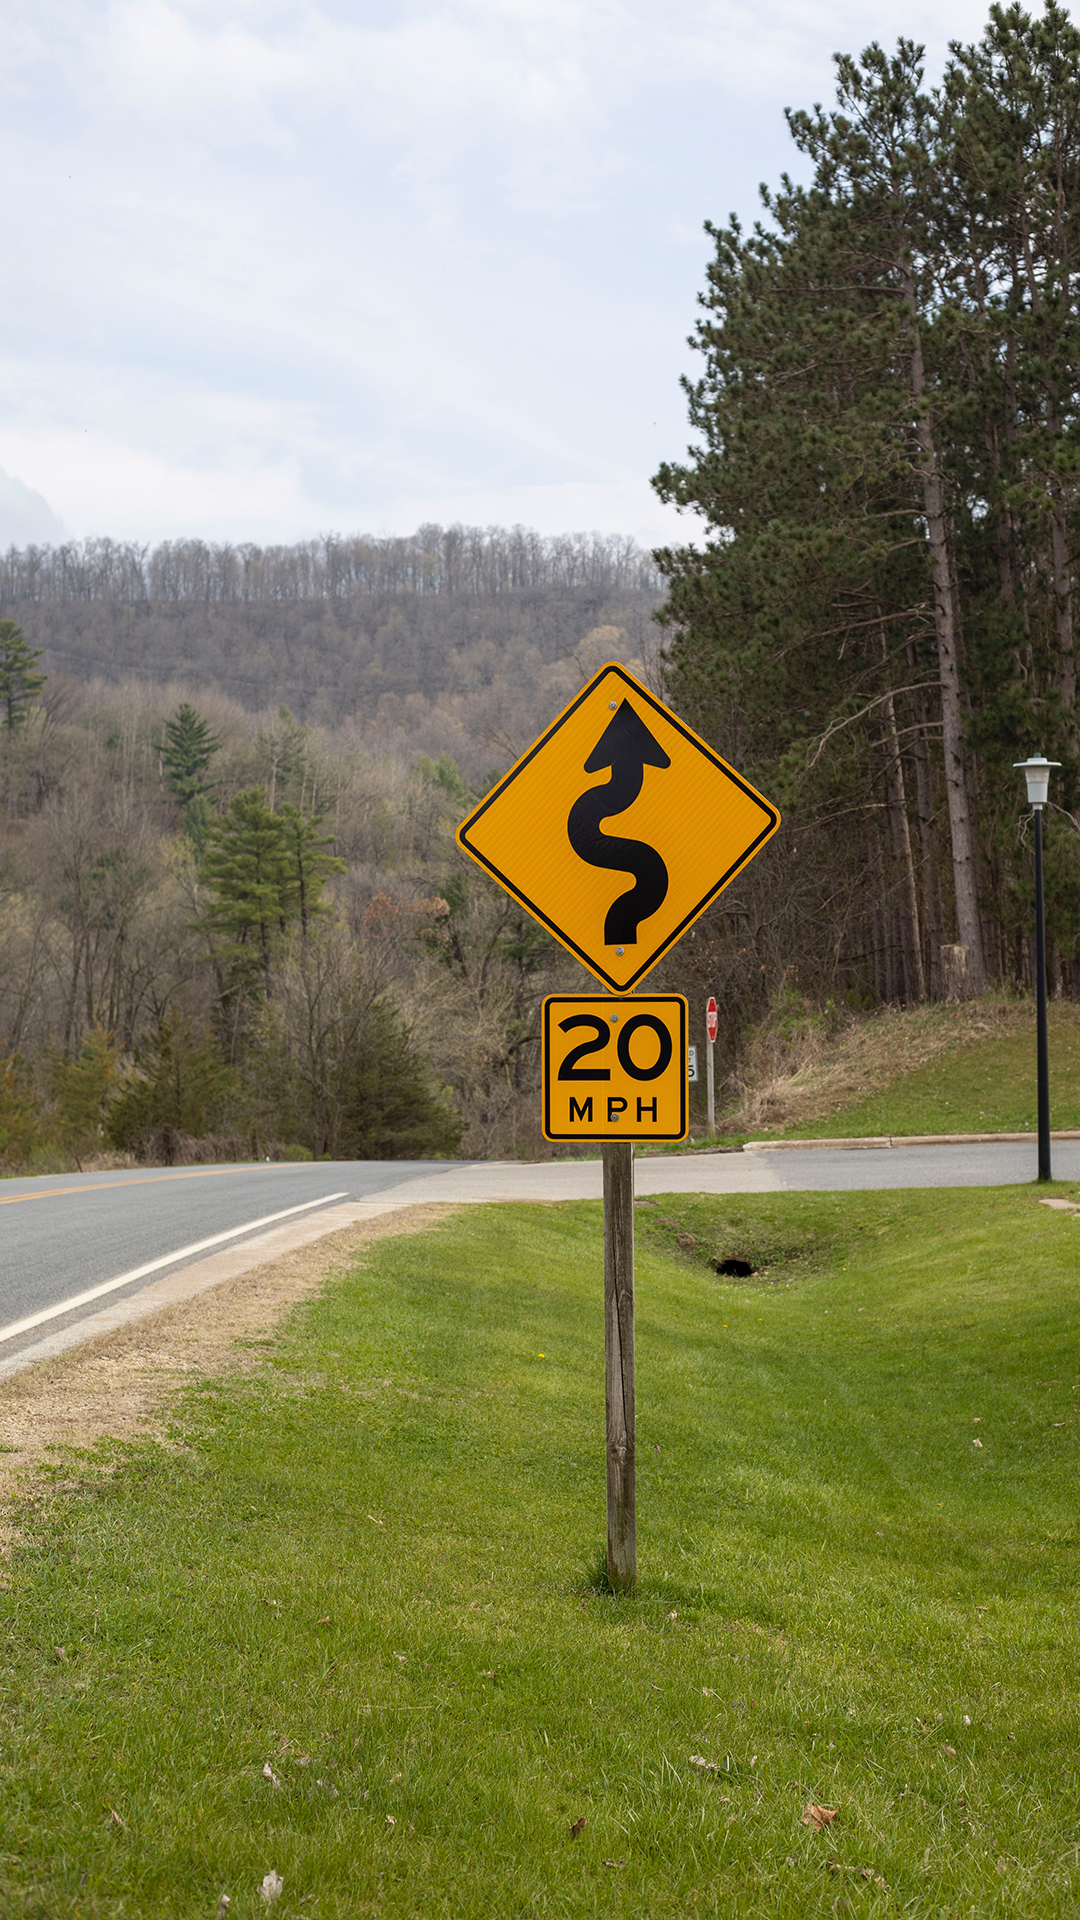 Yellow winding road sign and 20 mph sign